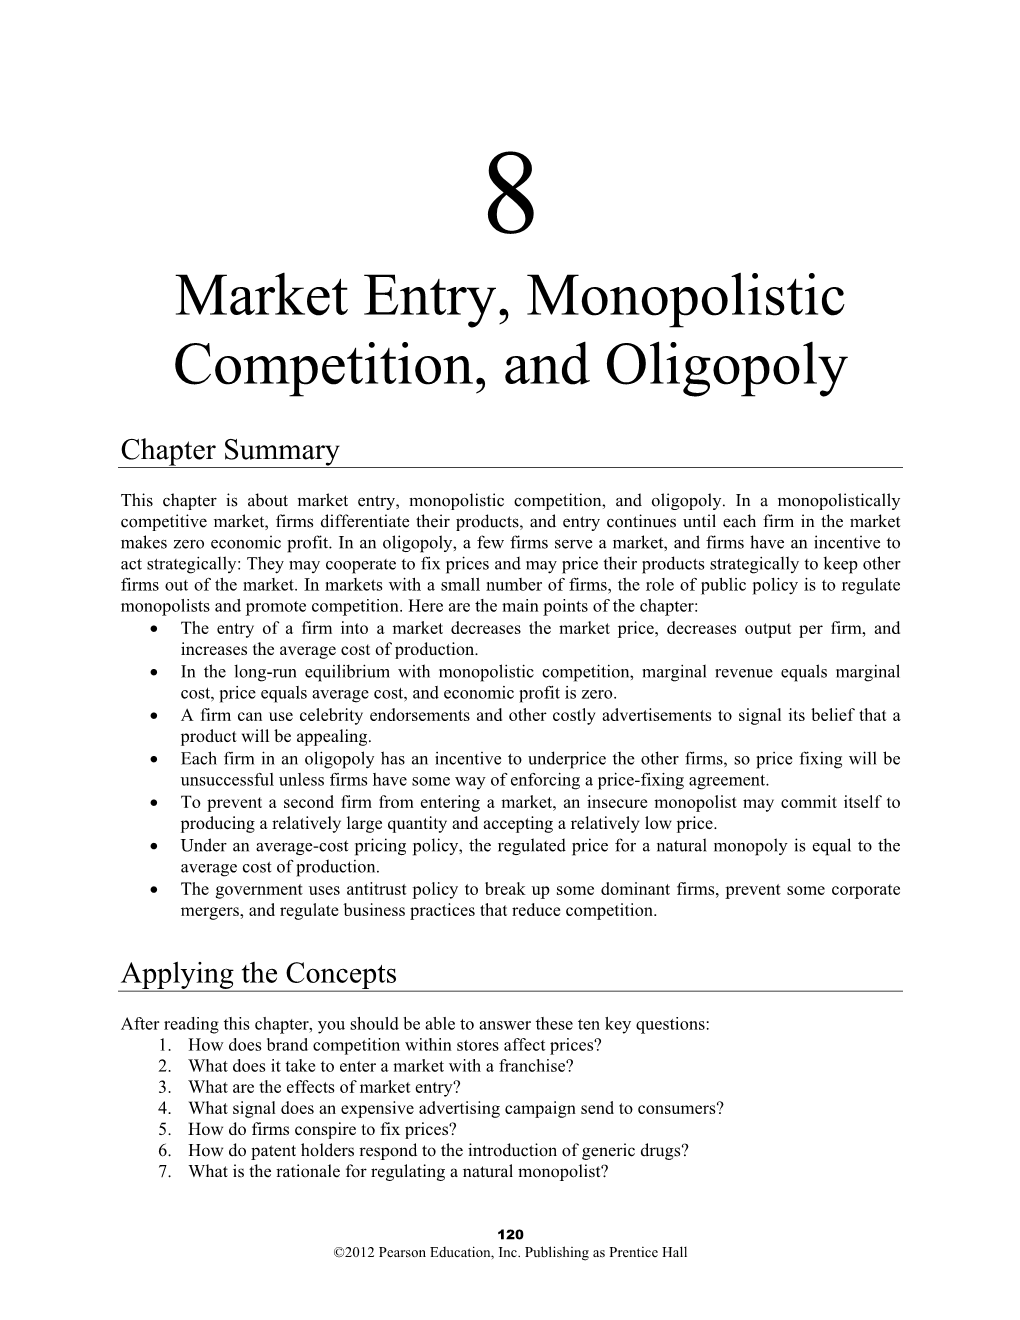 Market Entry, Monopolistic Competition, and Oligopoly